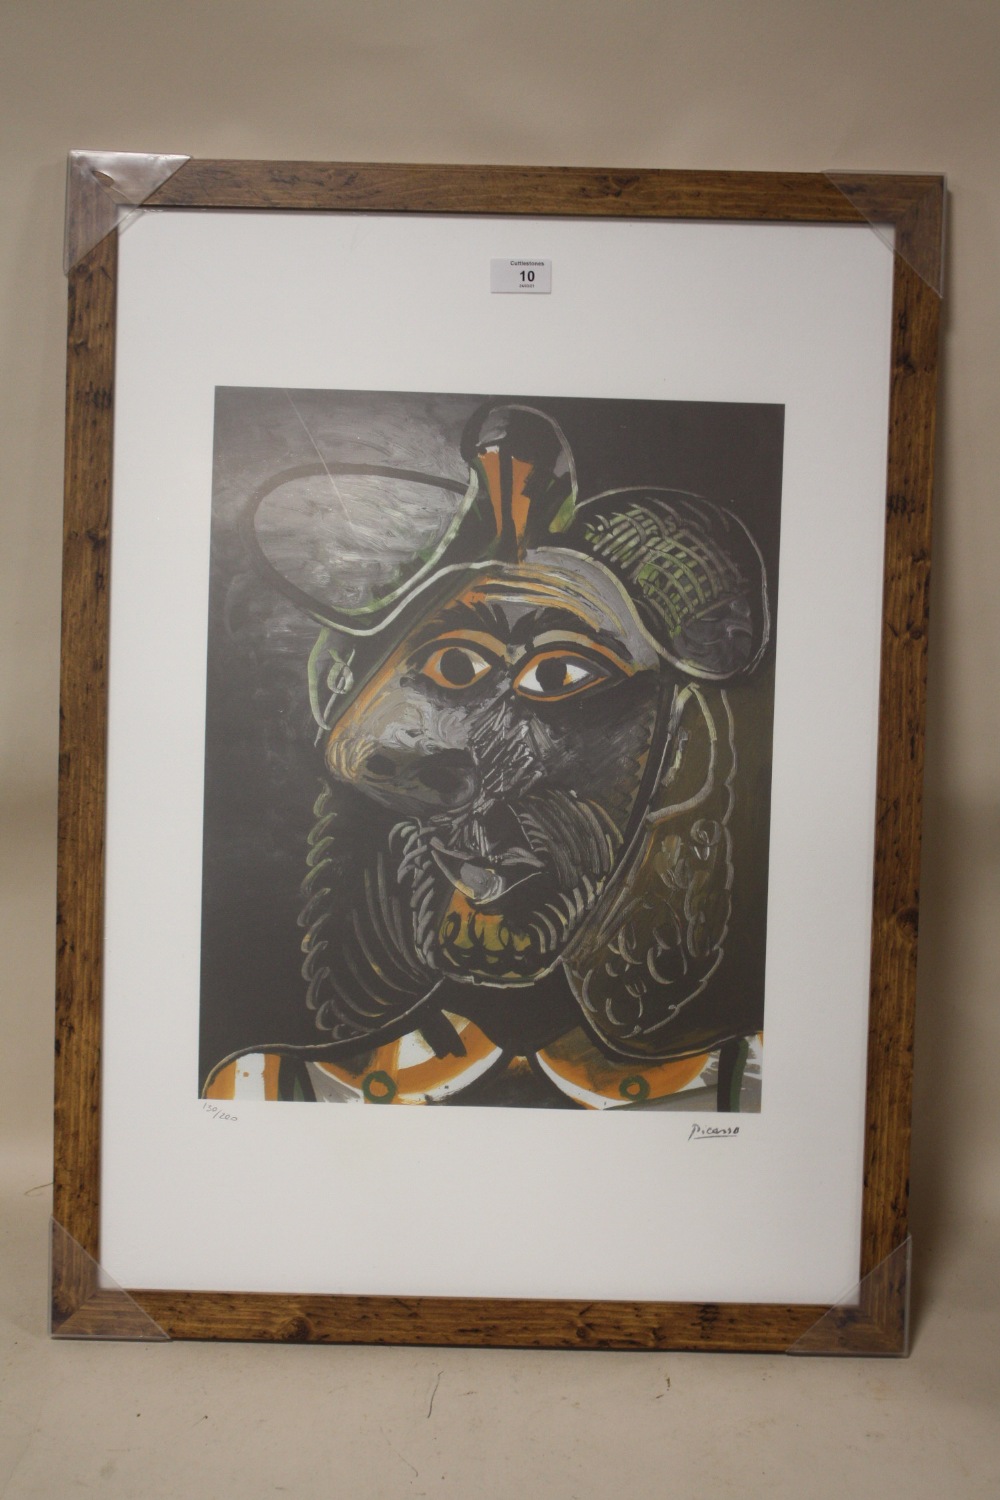 A FRAMED AND GLAZED LIMITED EDITION PICASSO ABSTRACT PORTRAIT STUDY PRINT 130/200 WITH BLIND STAMP - Image 2 of 4